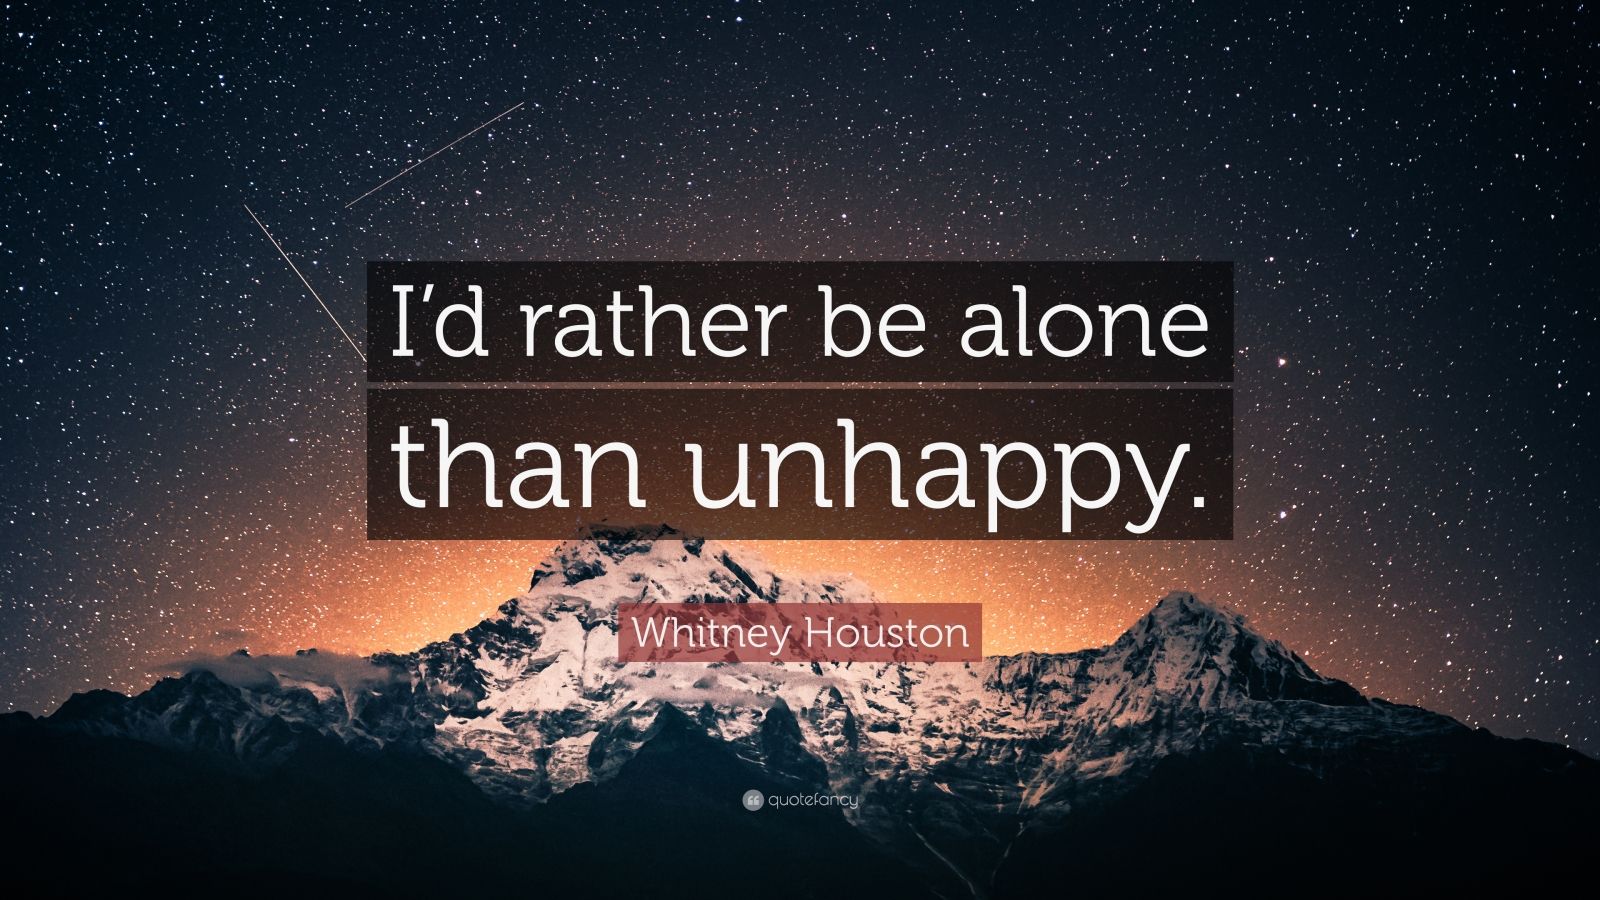 Whitney Houston Quote “I’d rather be alone than unhappy.” (7